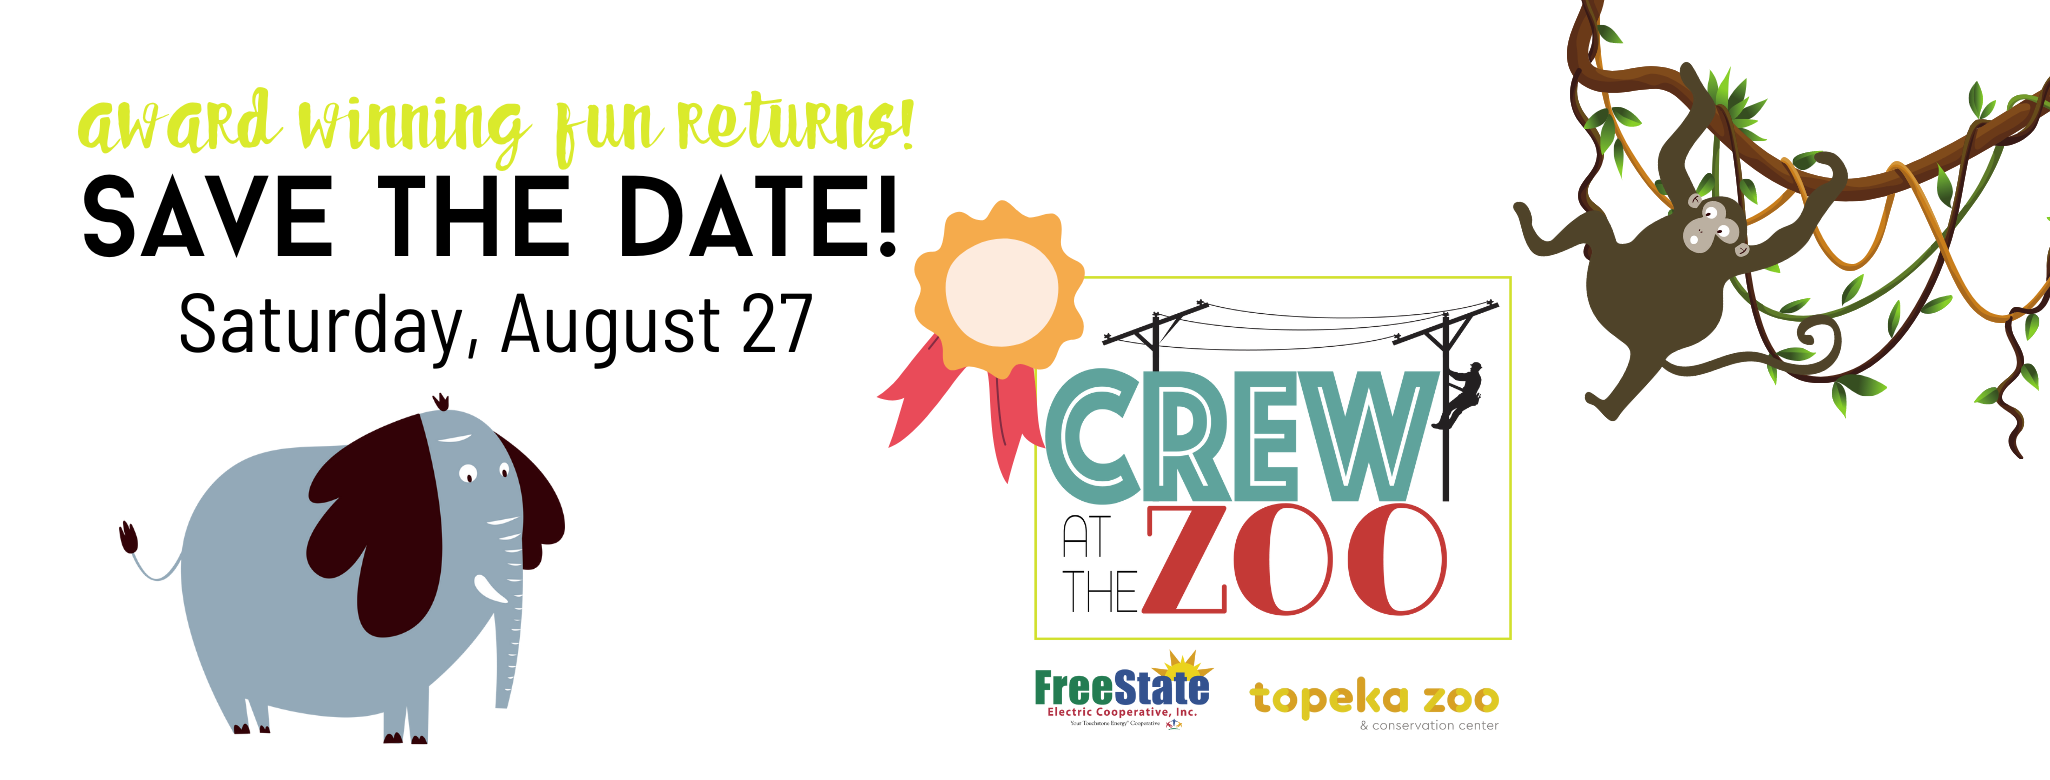 Crew at the zoo is back!